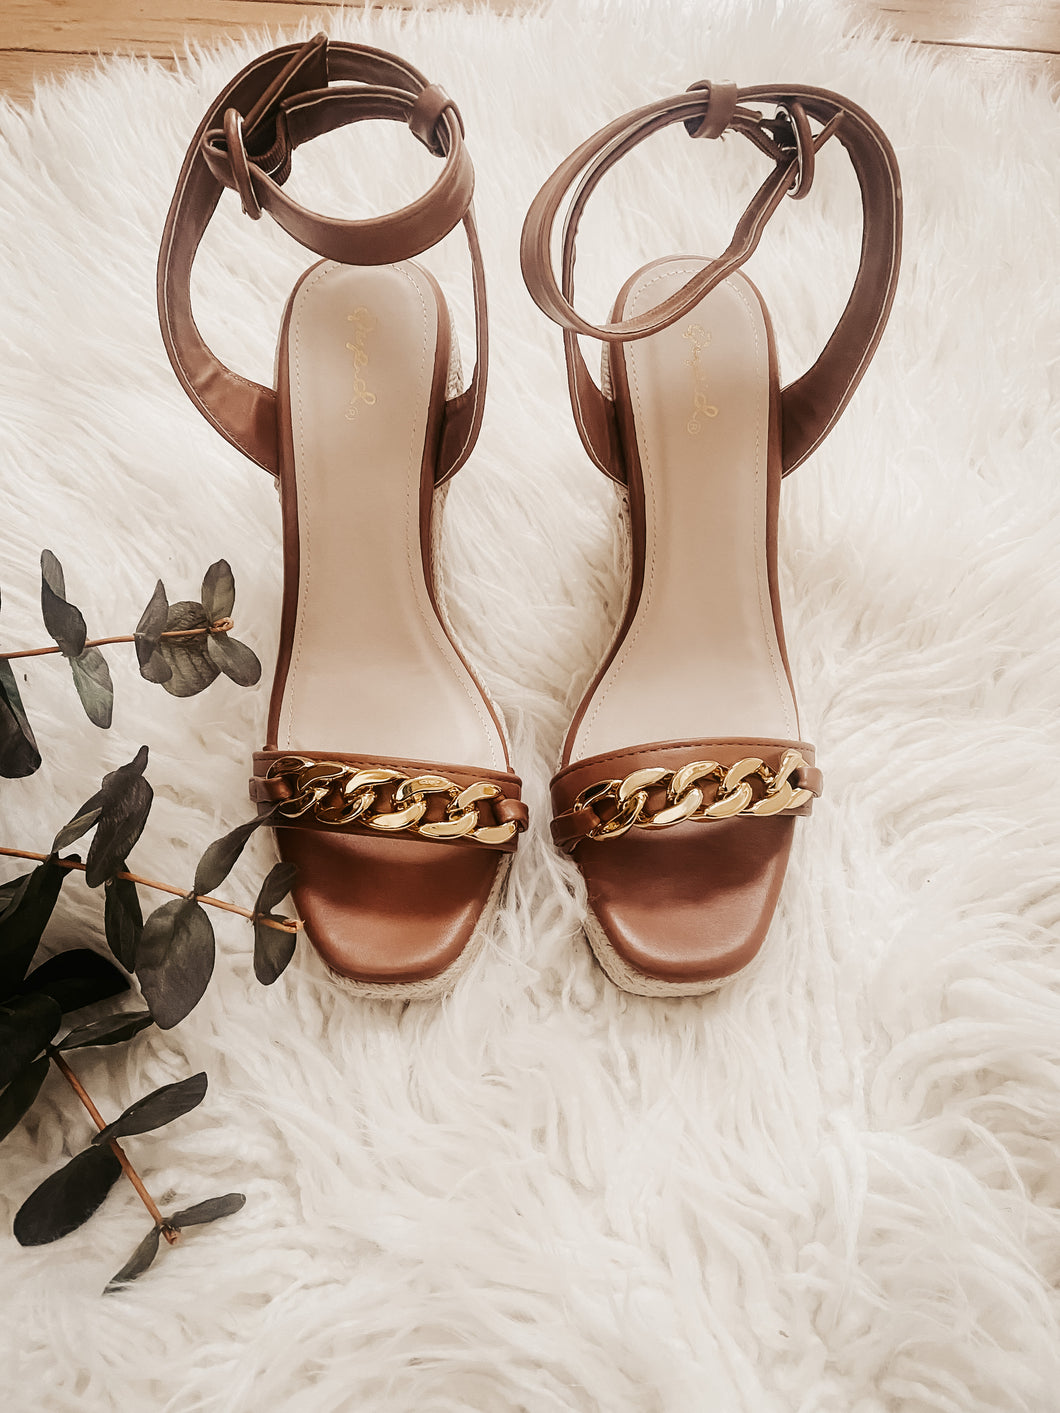 OCEAN AVE. GOLD CHAIN WEDGES